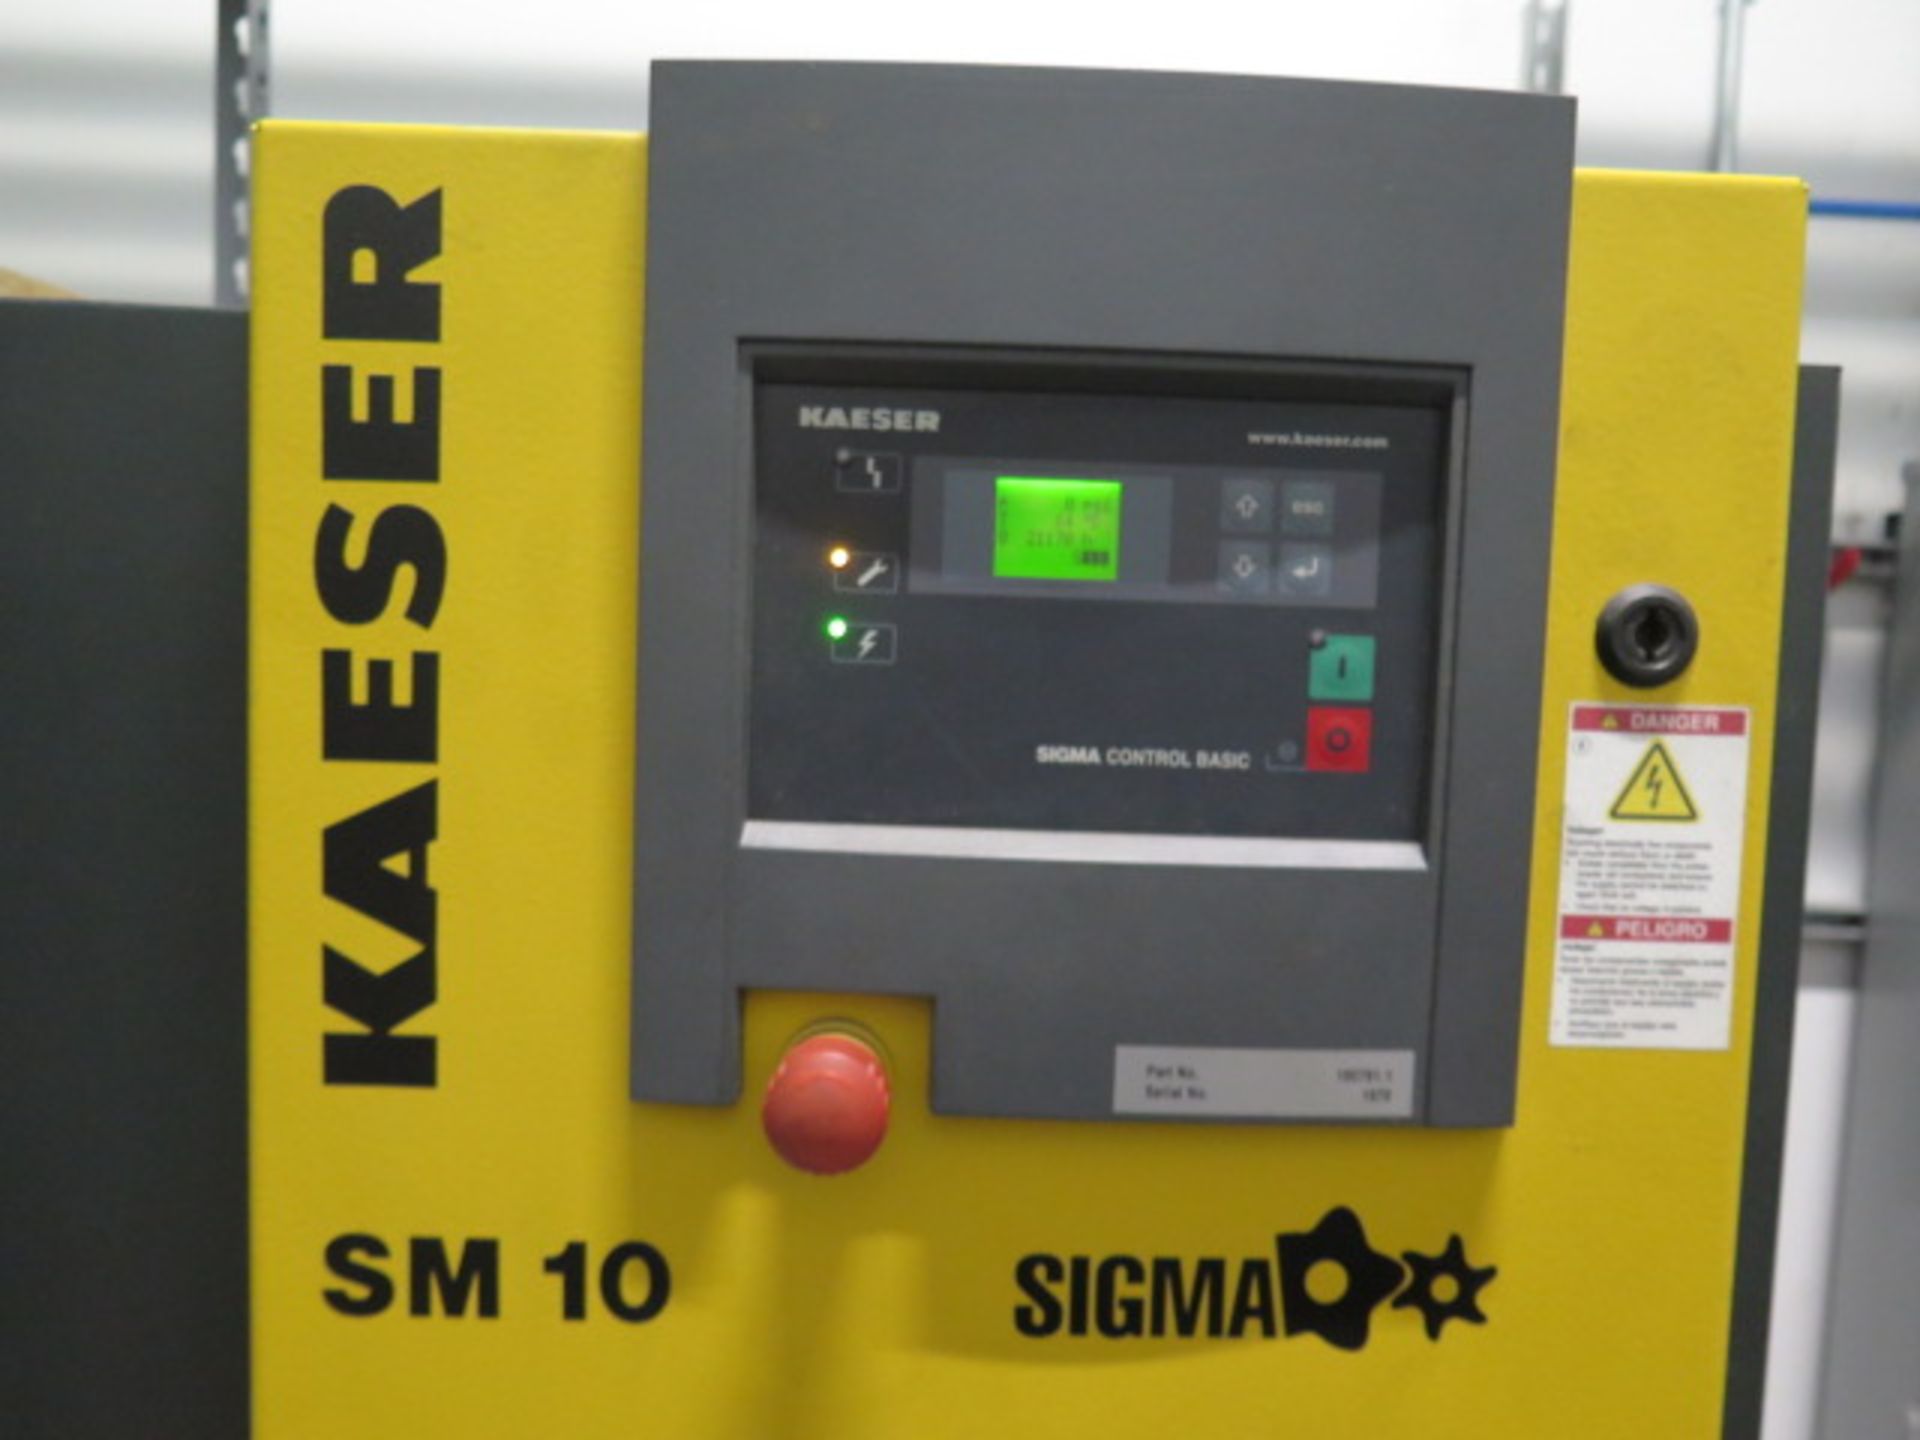 2015 Kaeser Aircenter SM10 10Hp Rotary Air Compressor s/n 1970 w/ Kaeser Sigma Controls, SOLD AS IS - Image 4 of 9